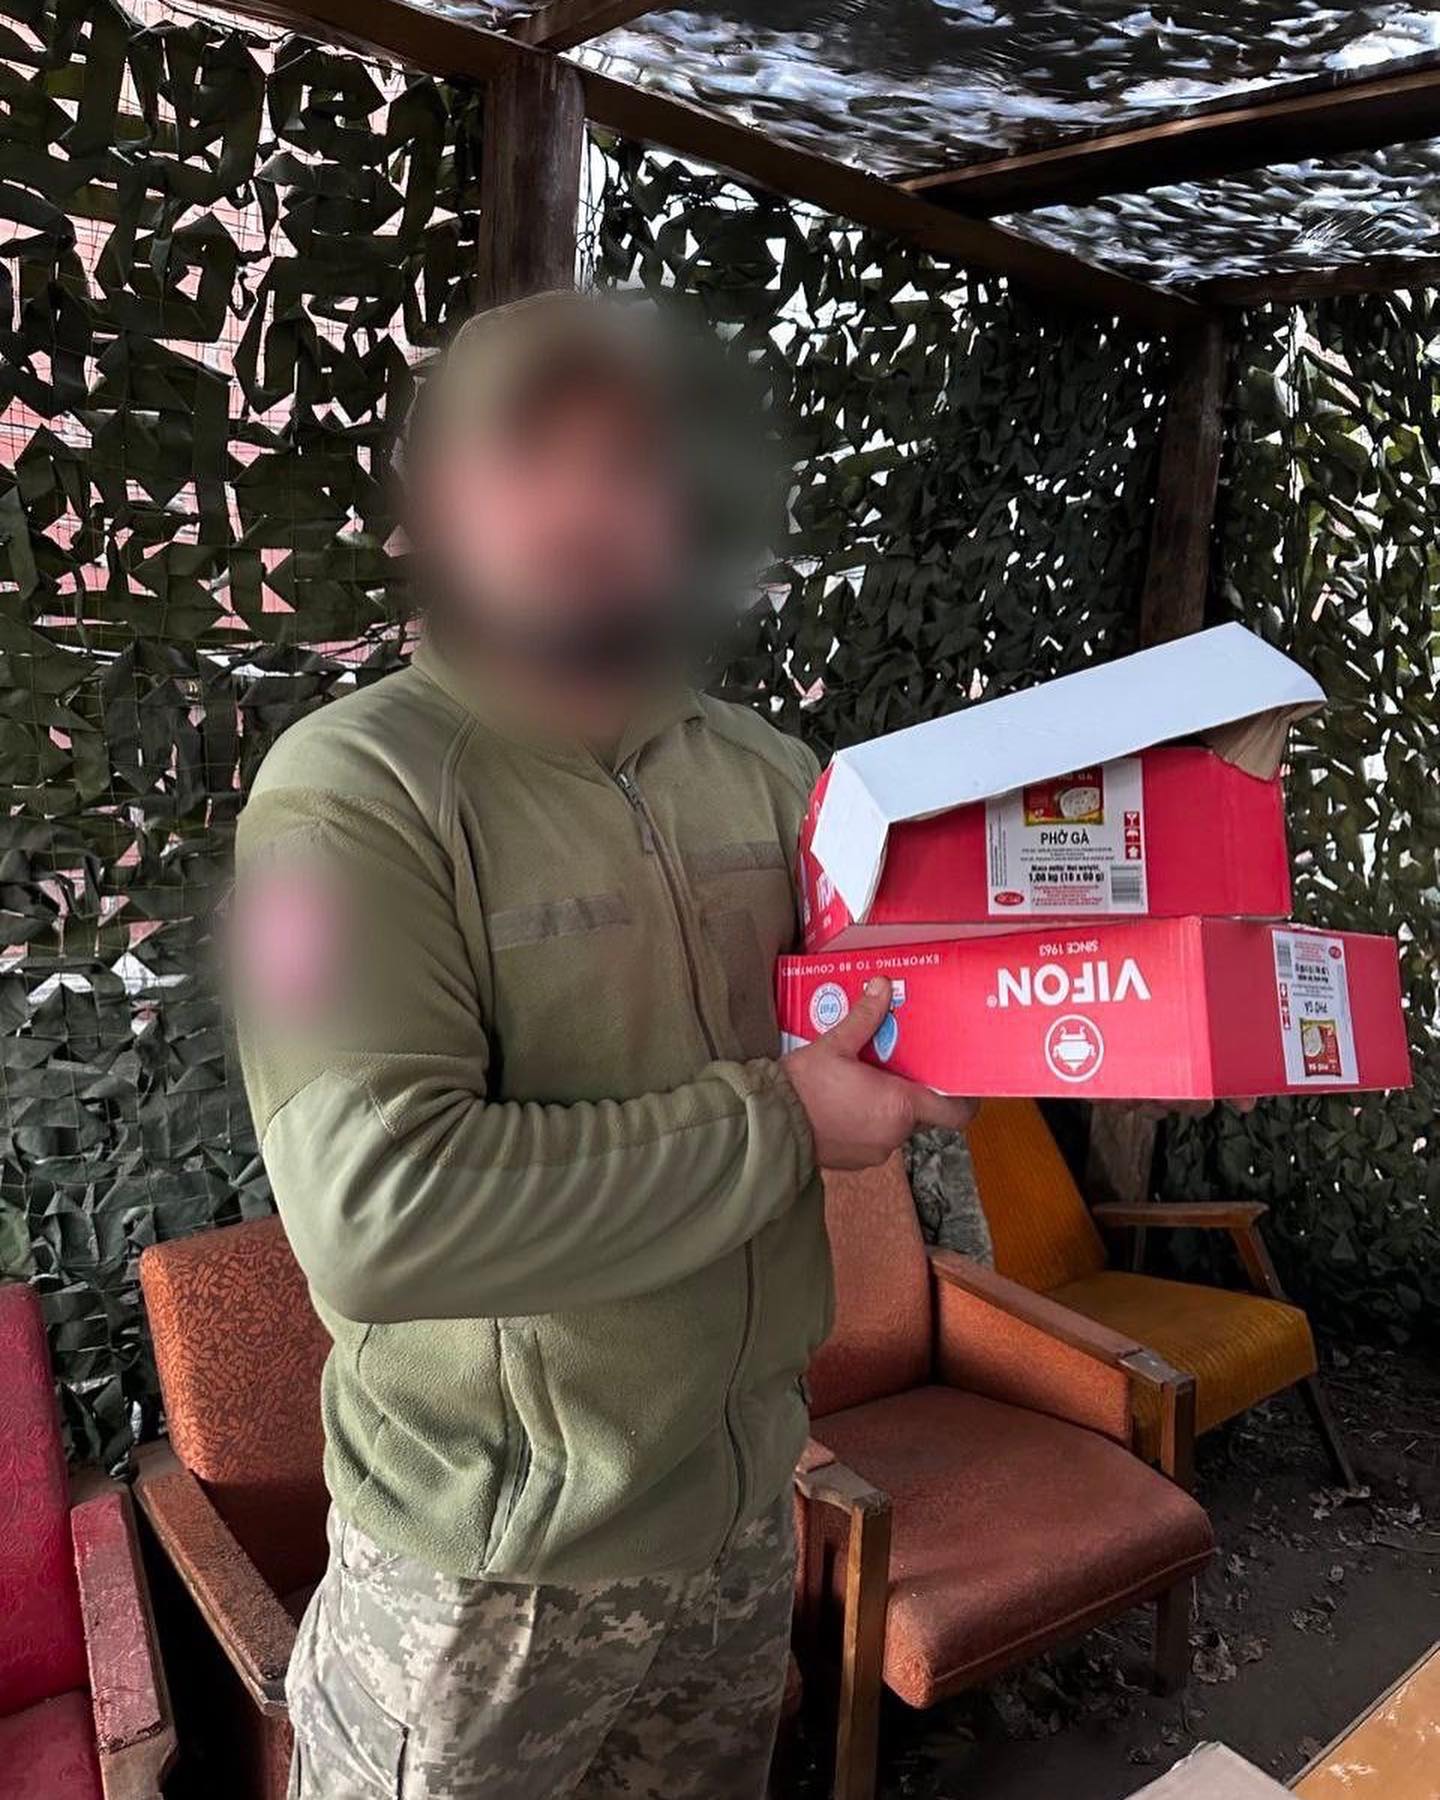 A man holding a box of nokia boxes.